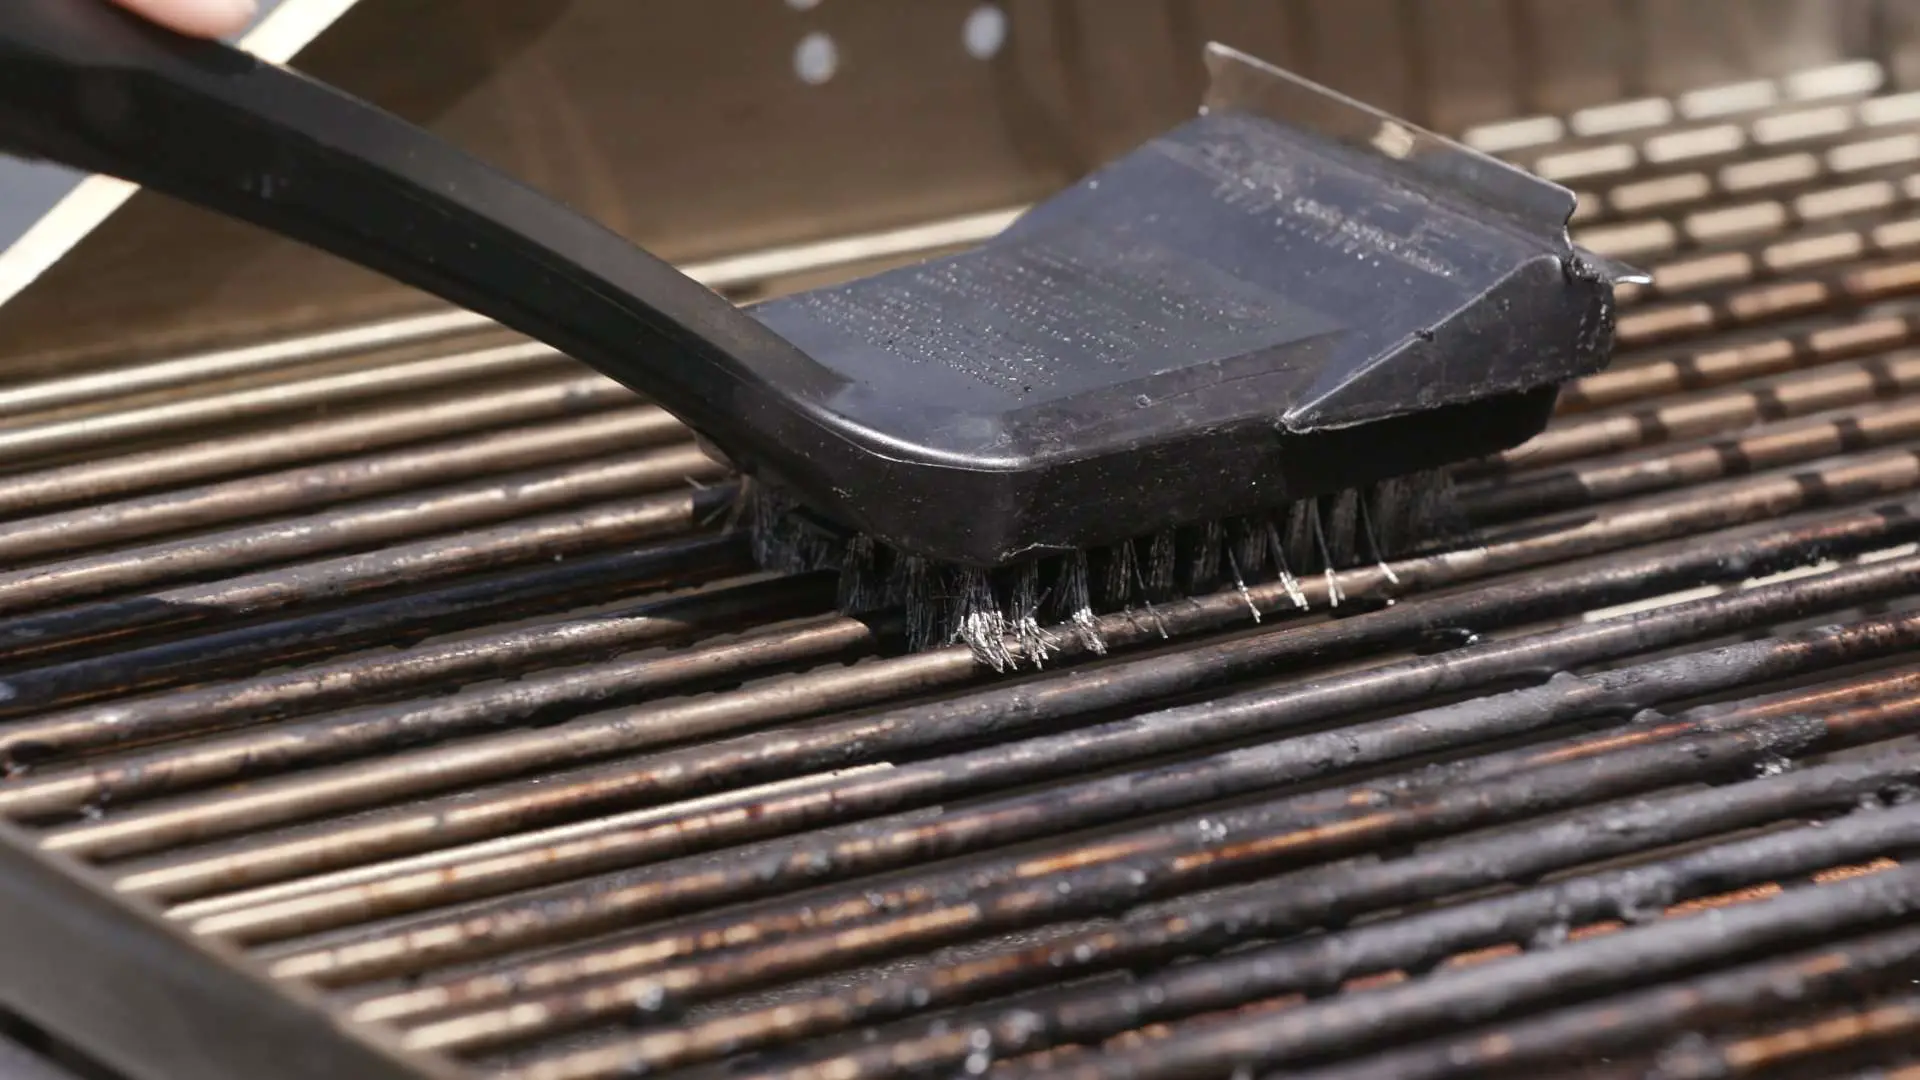 How to Clean a Stainless Steel Grill